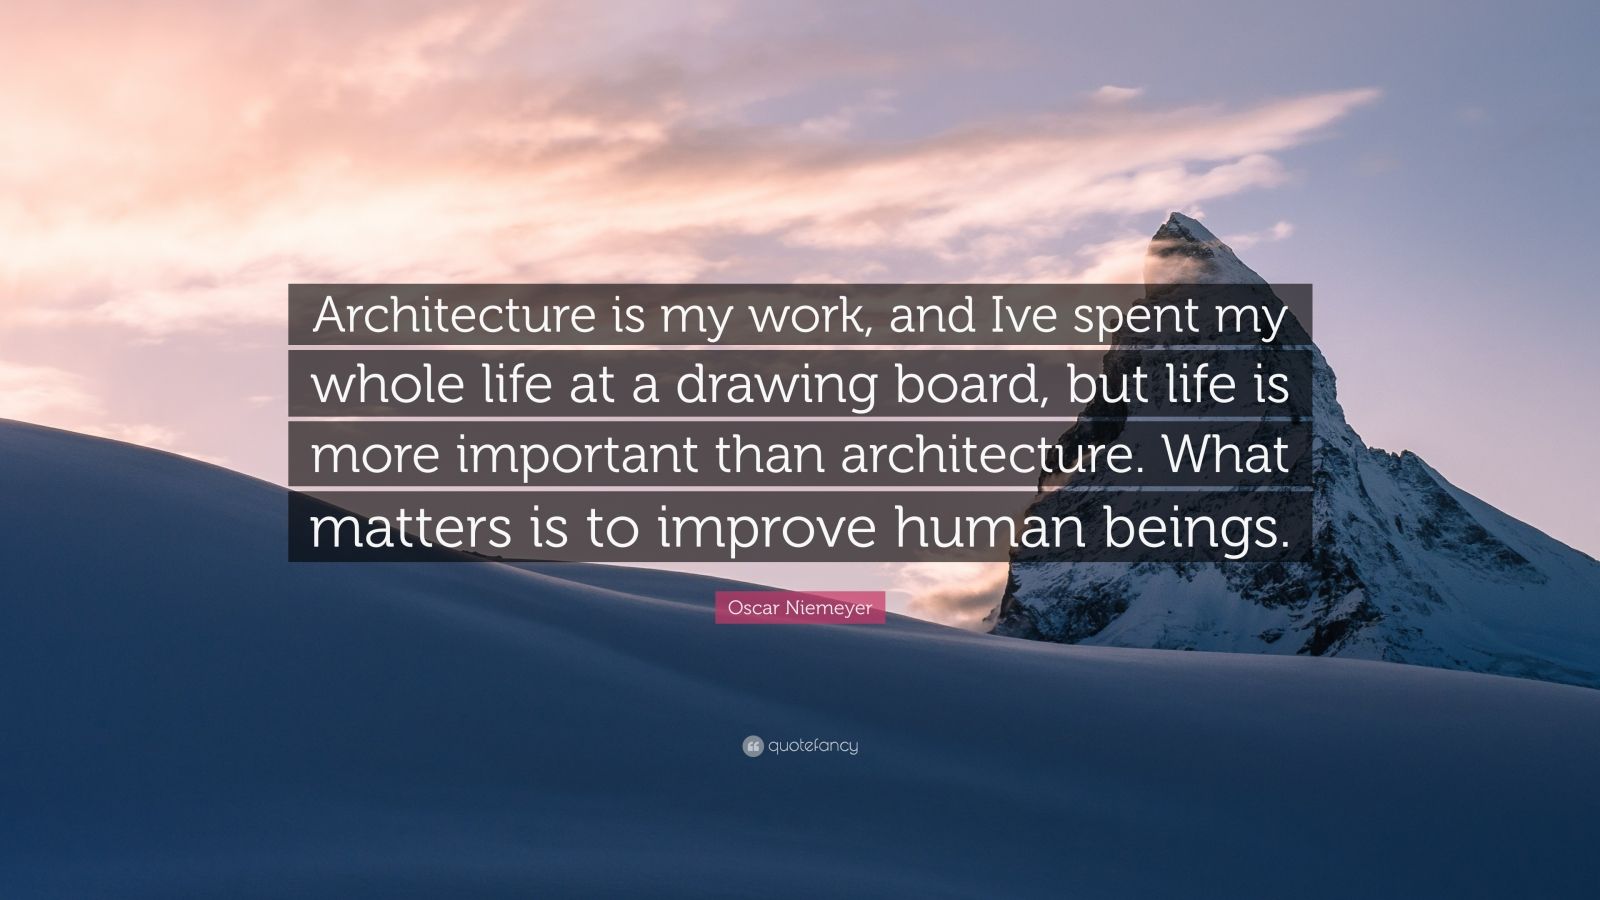 Oscar Niemeyer Quote: “Architecture is my work, and Ive spent my whole ...